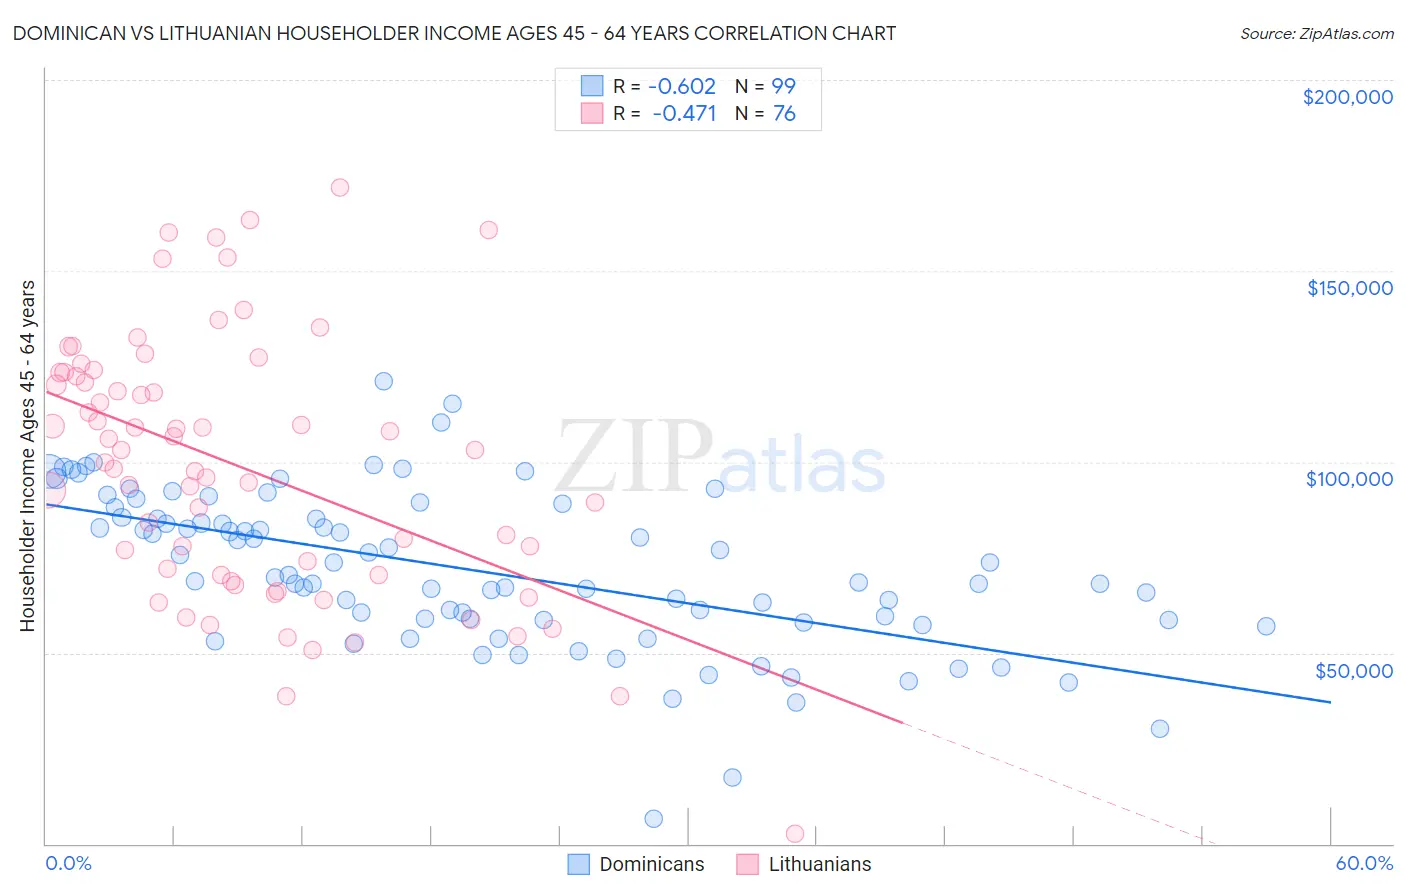 Dominican vs Lithuanian Householder Income Ages 45 - 64 years